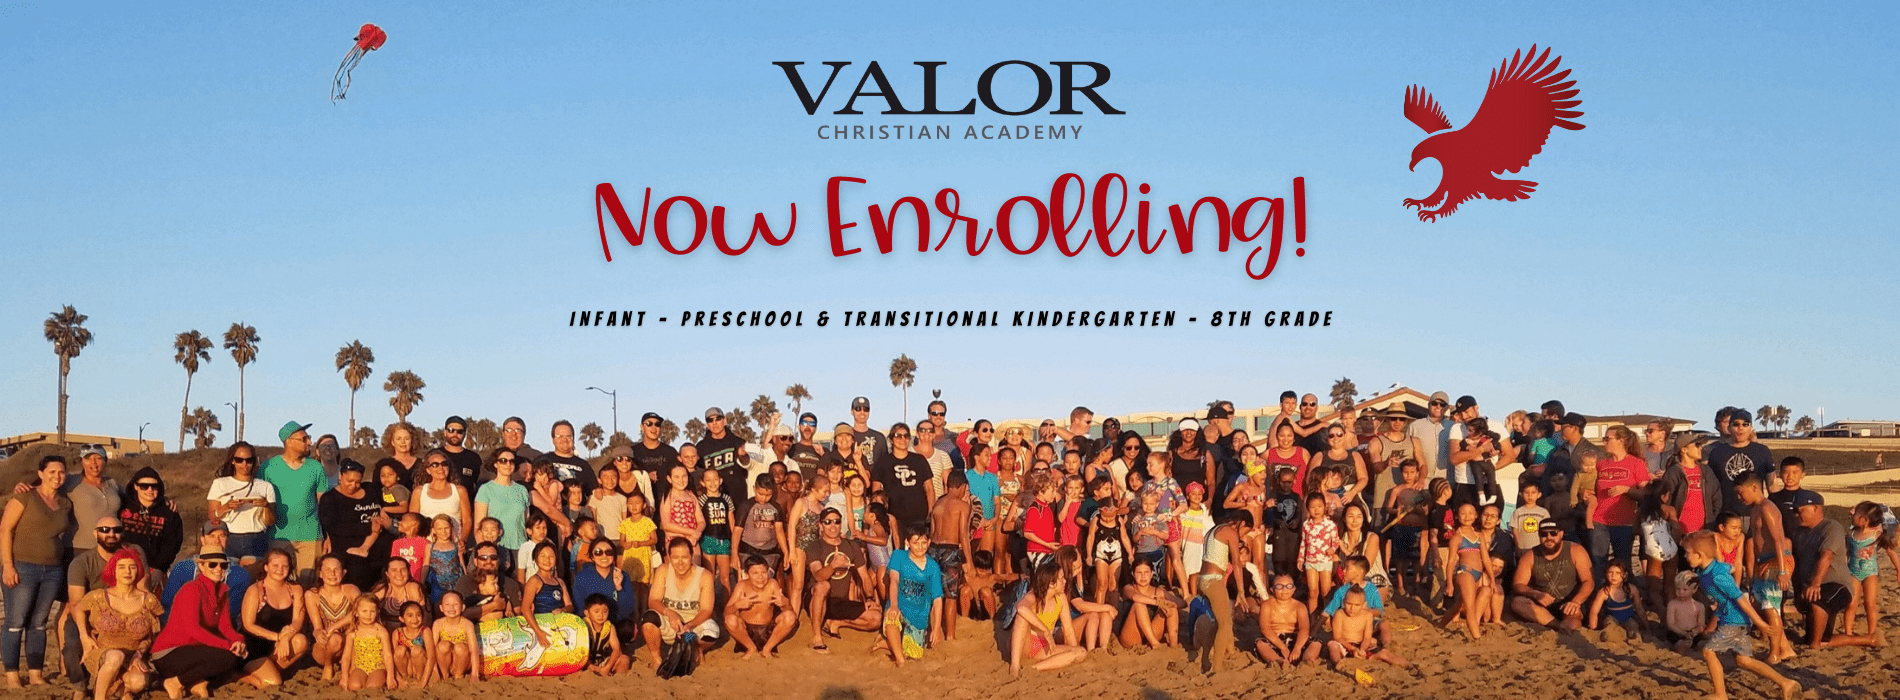 Valor Christian Academy is now enrolling